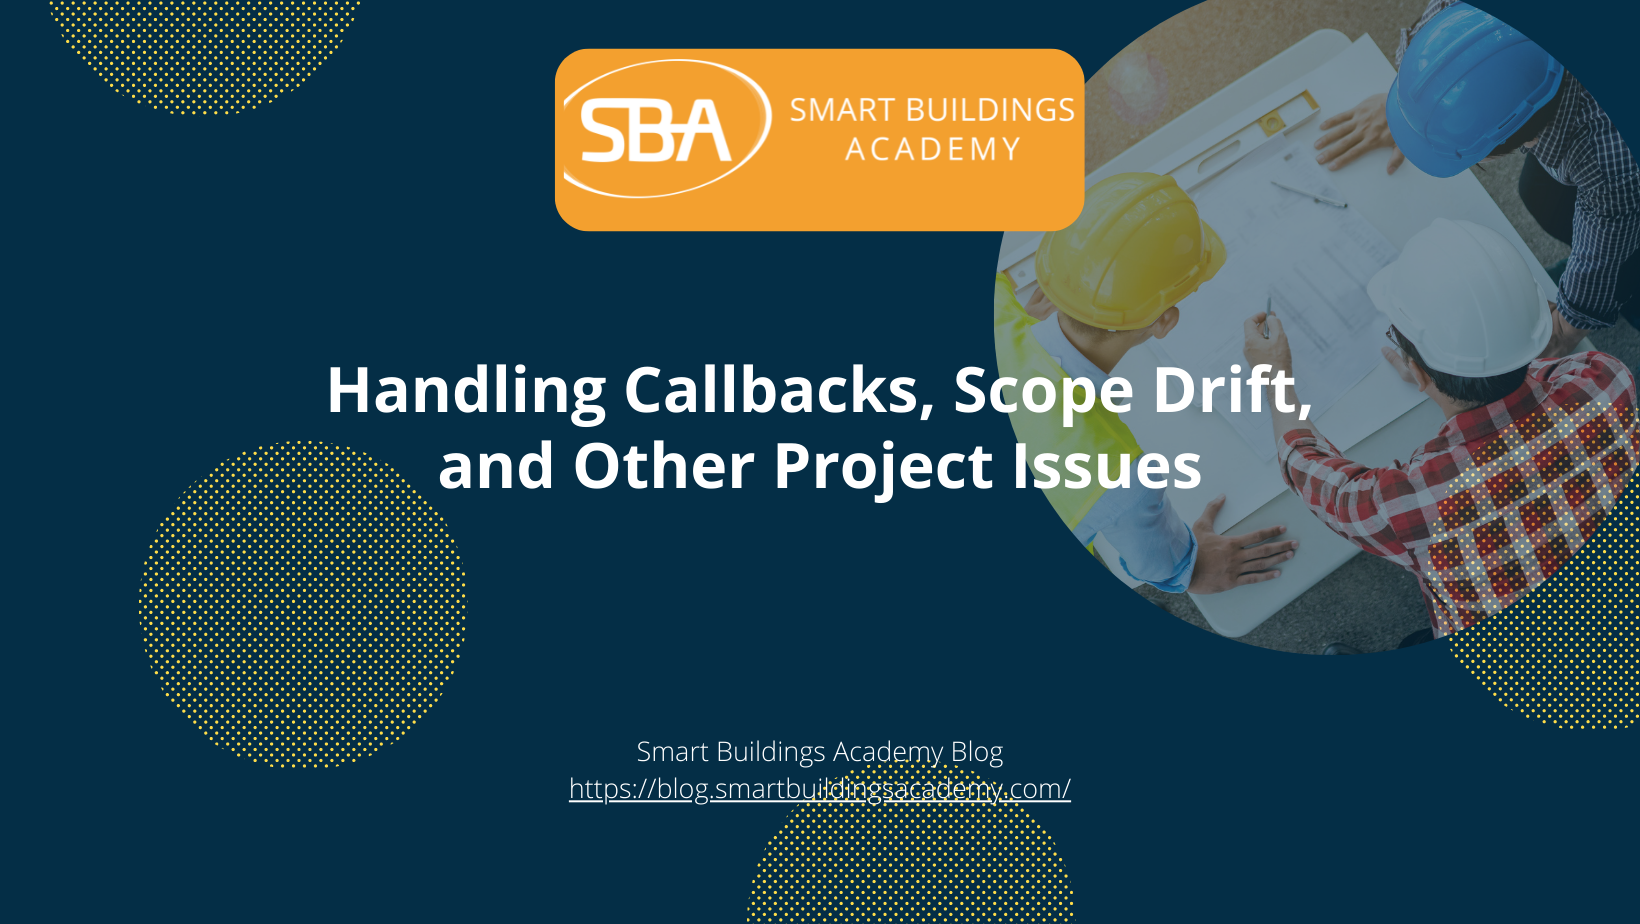 Handling Callbacks, Scope Drift, and Other Project Issues